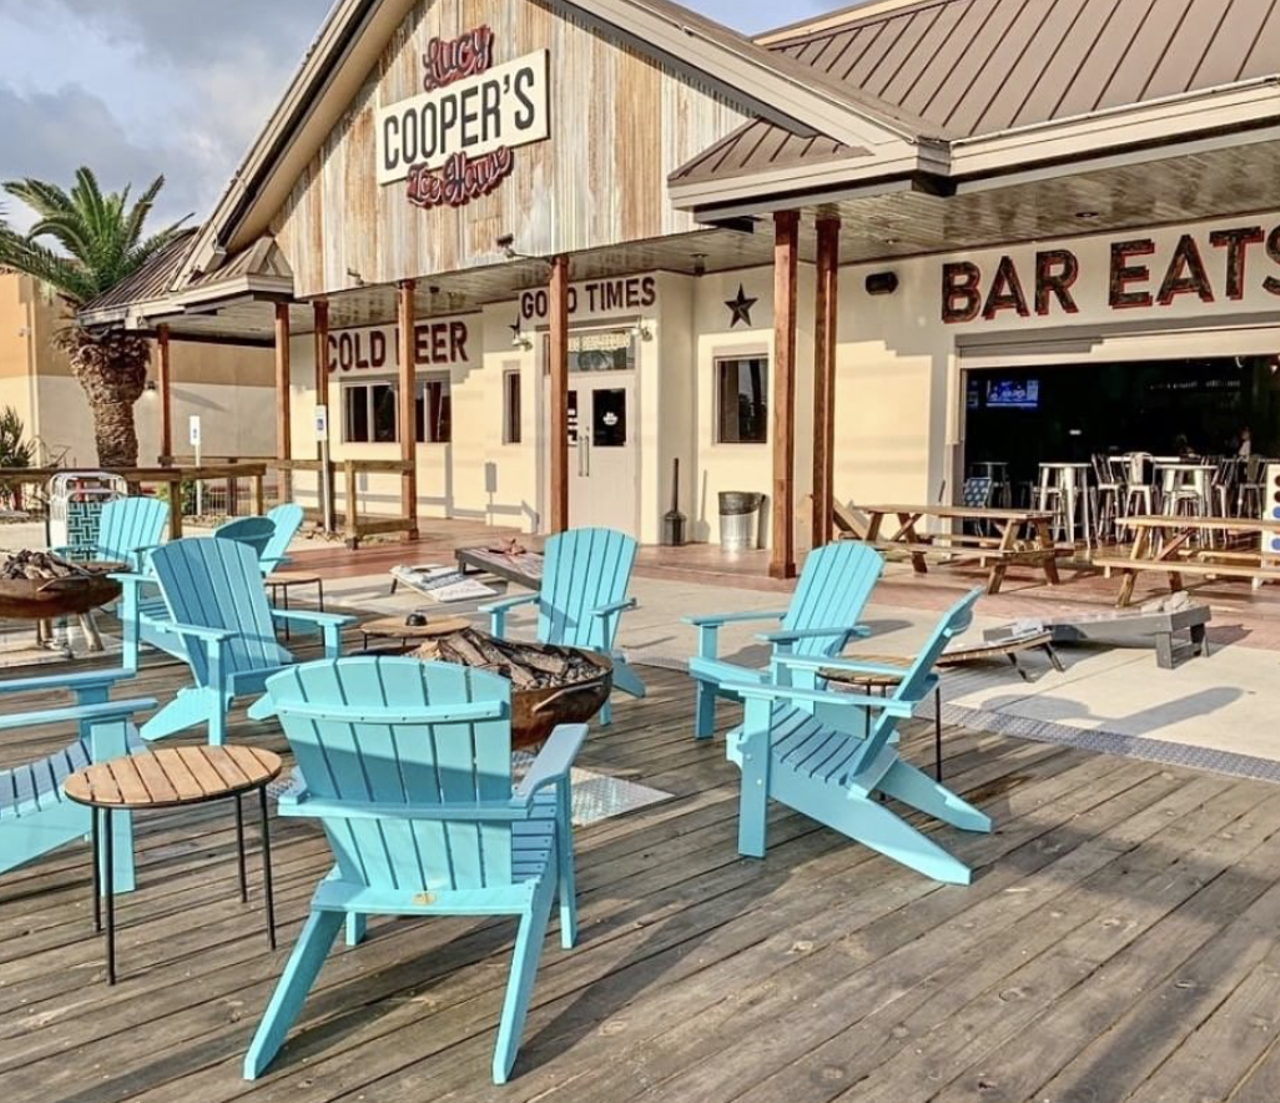 Lucy Cooper’s Texas Ice House
16080 San Pedro Ave, (210) 462-1894, lucycoopers.com
There’s nothing better than lounging in an adirondack chair while the Texas sun beams down and a breeze passes though — except for maybe not having to travel through downtown to get there. 
Photo via Instagram / lucycoopersicehouse